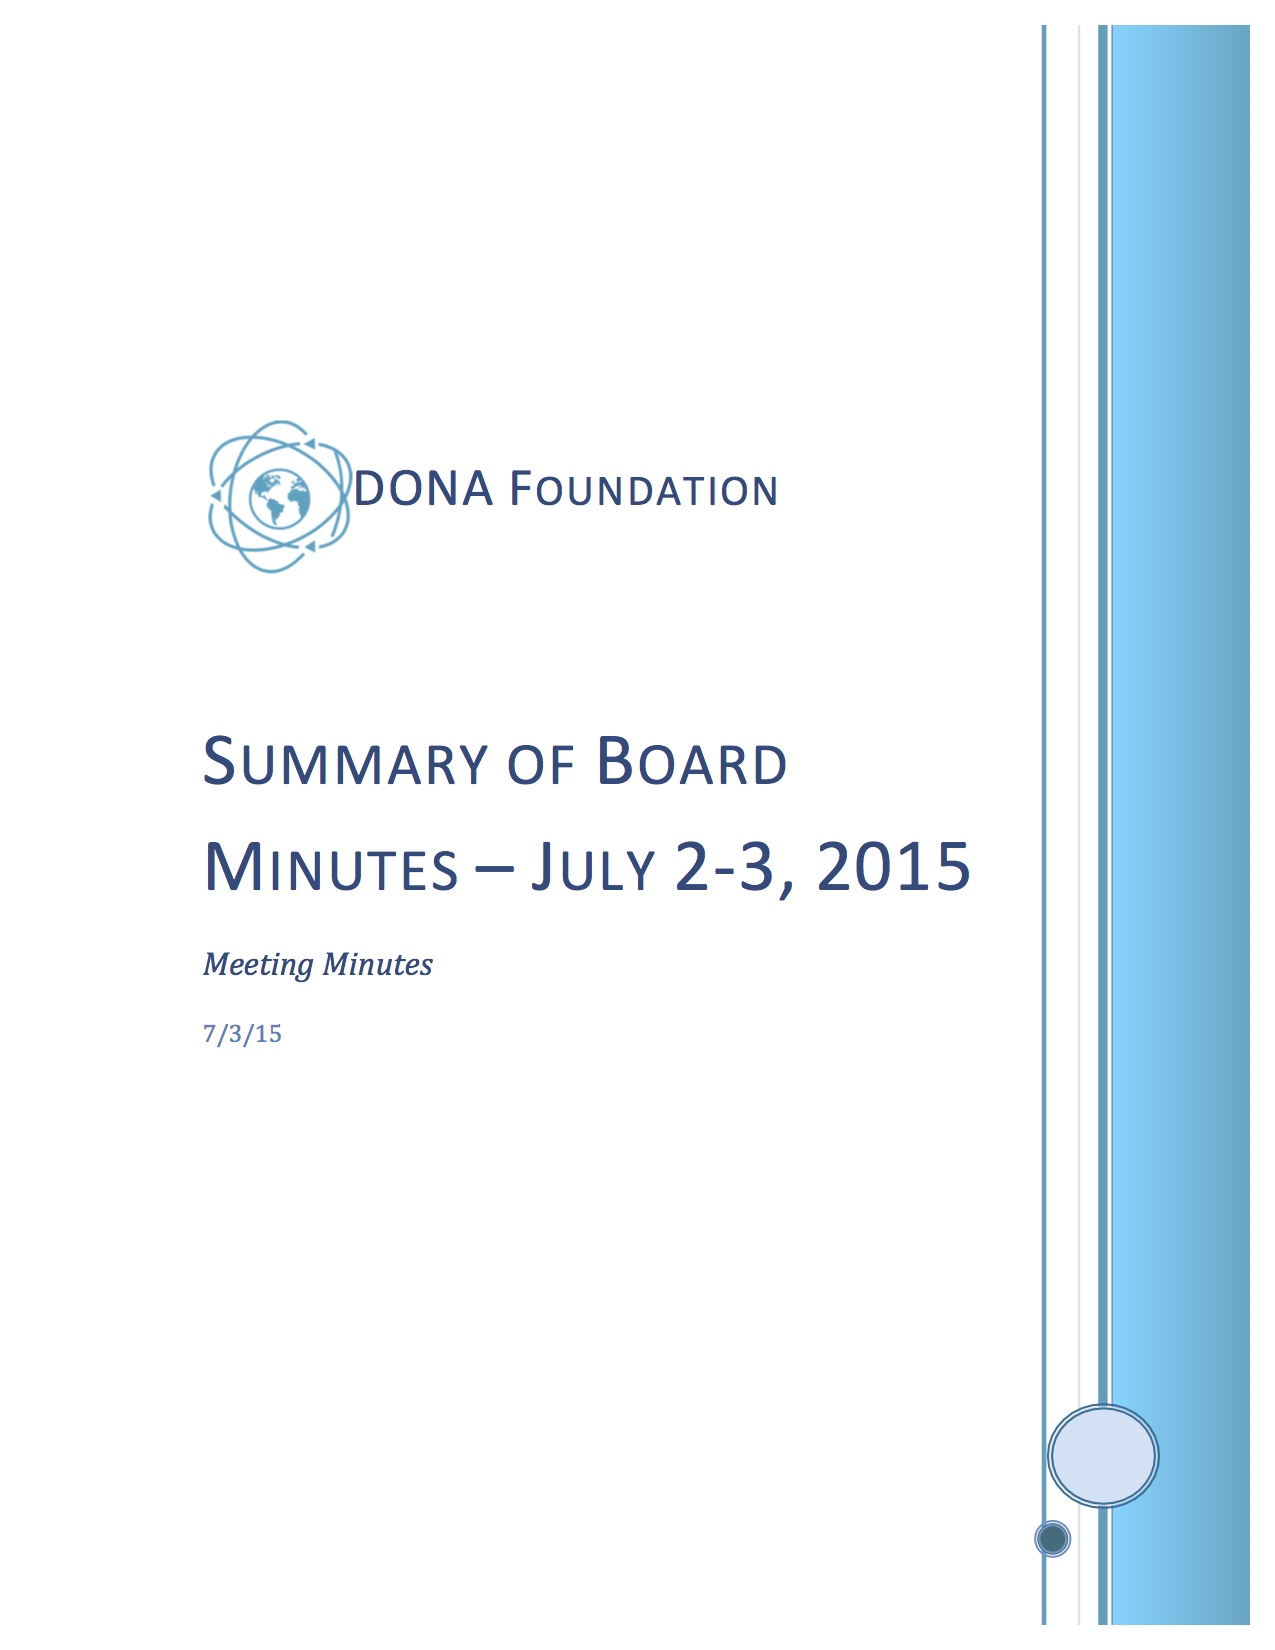 Summary of Board Minutes July 2-3, 2015